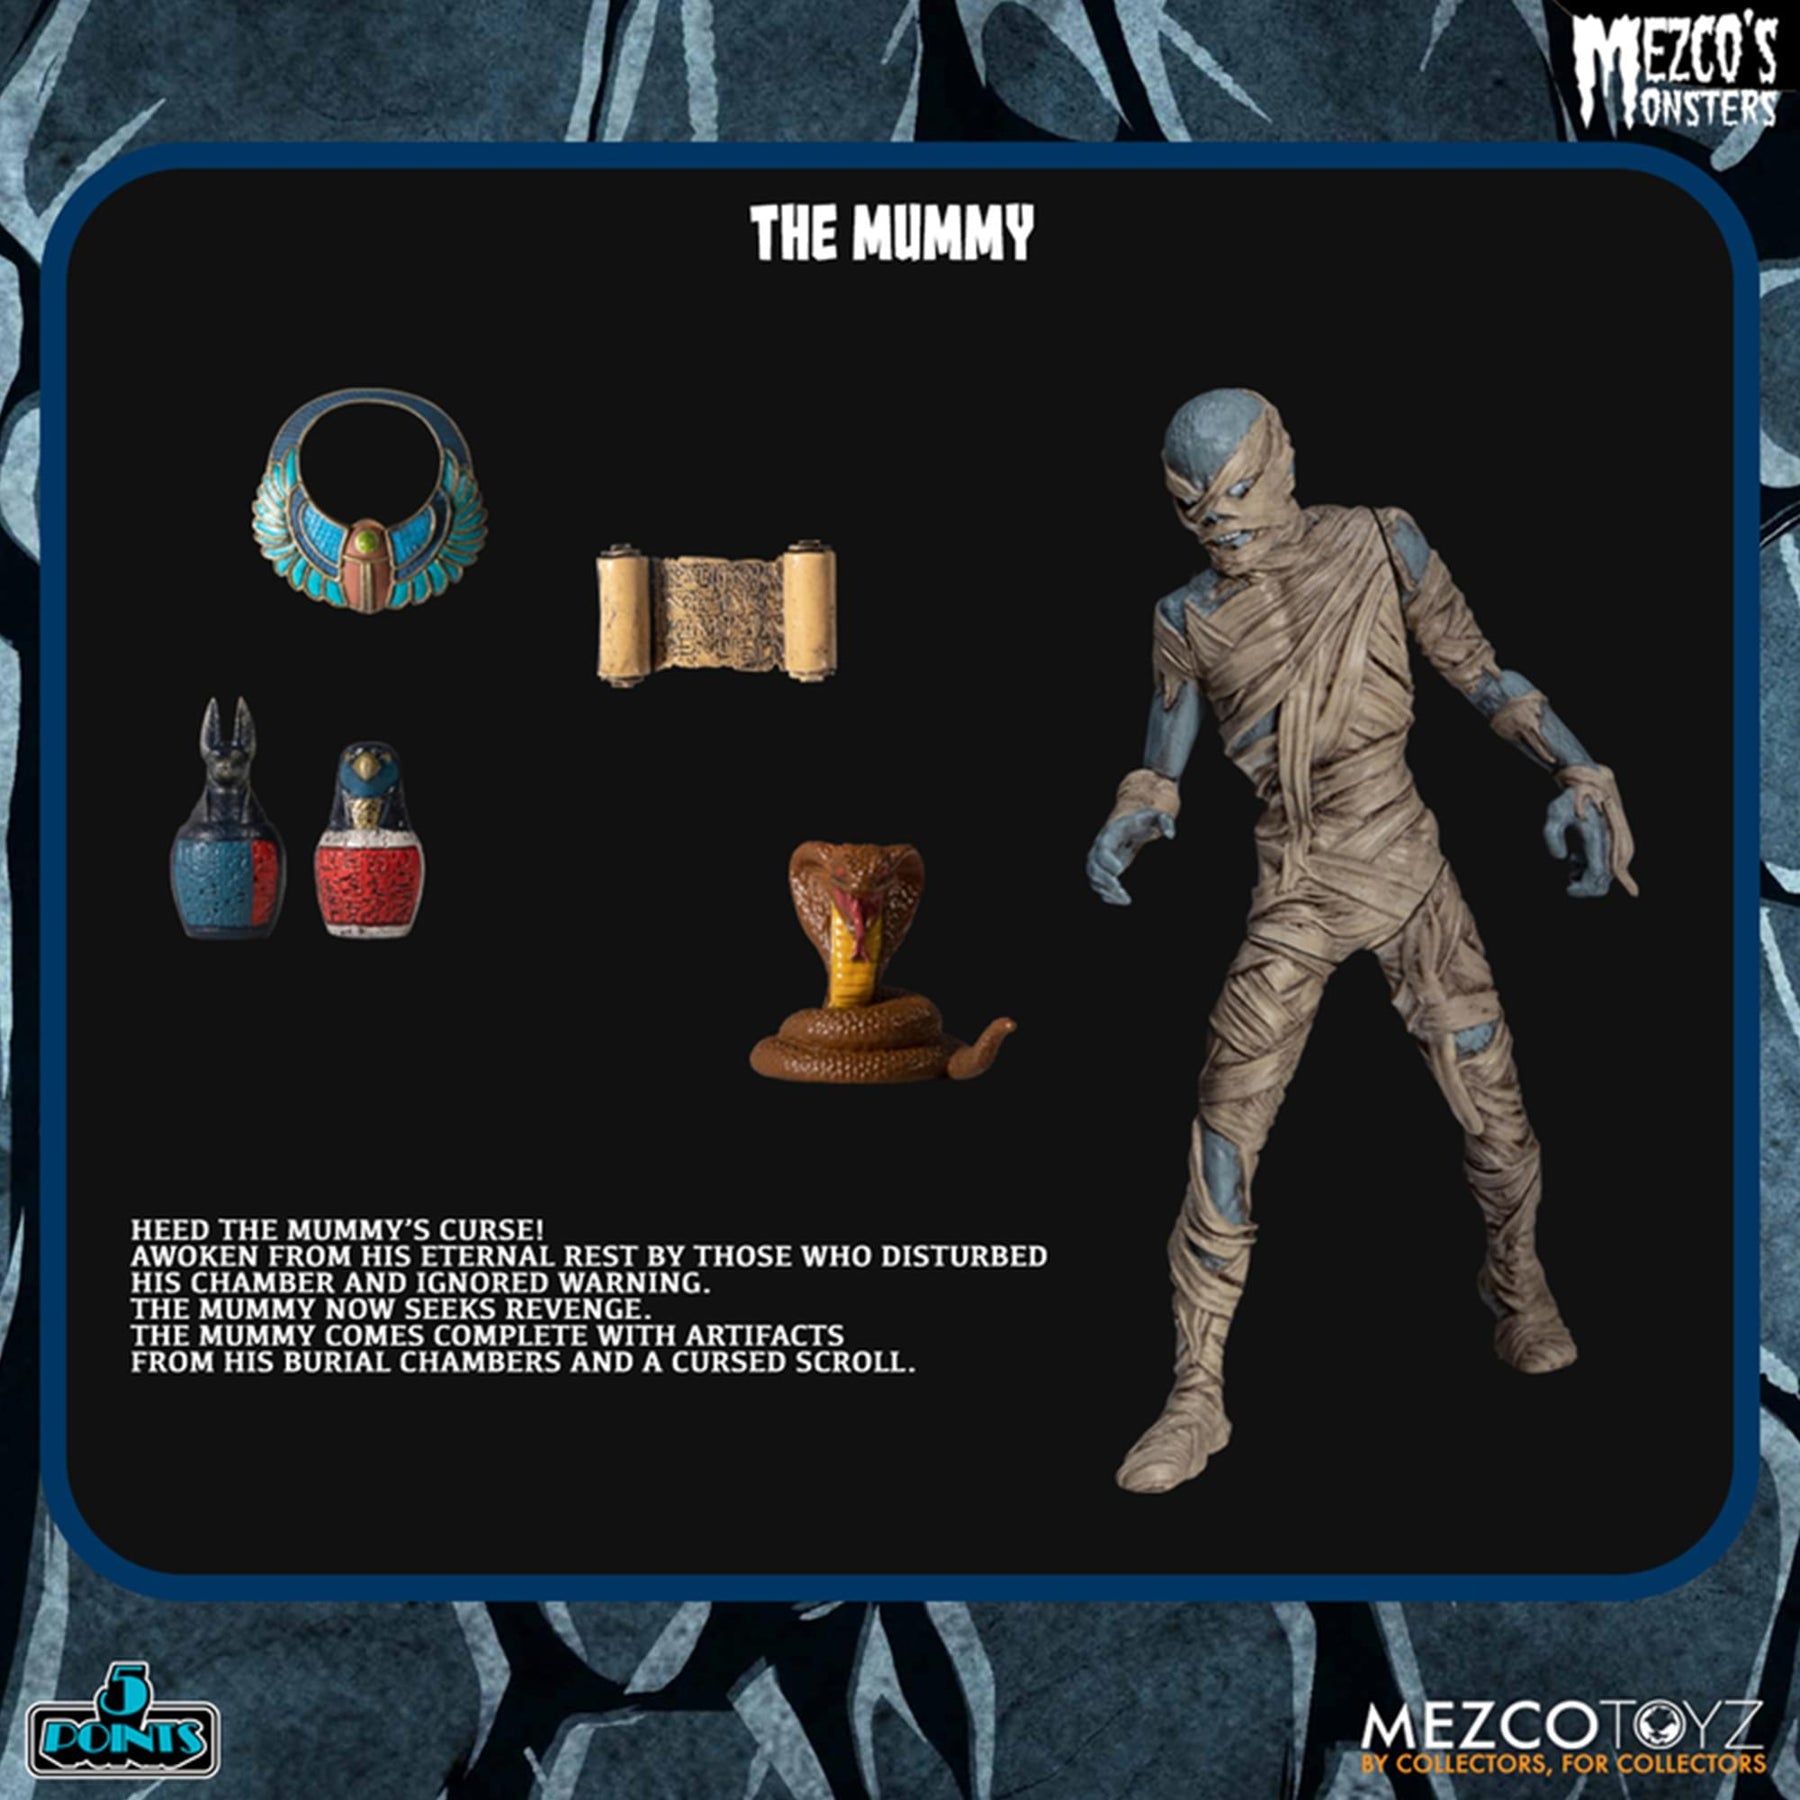 5 Points Mezco’s Monsters Tower of Fear Deluxe Boxed Set